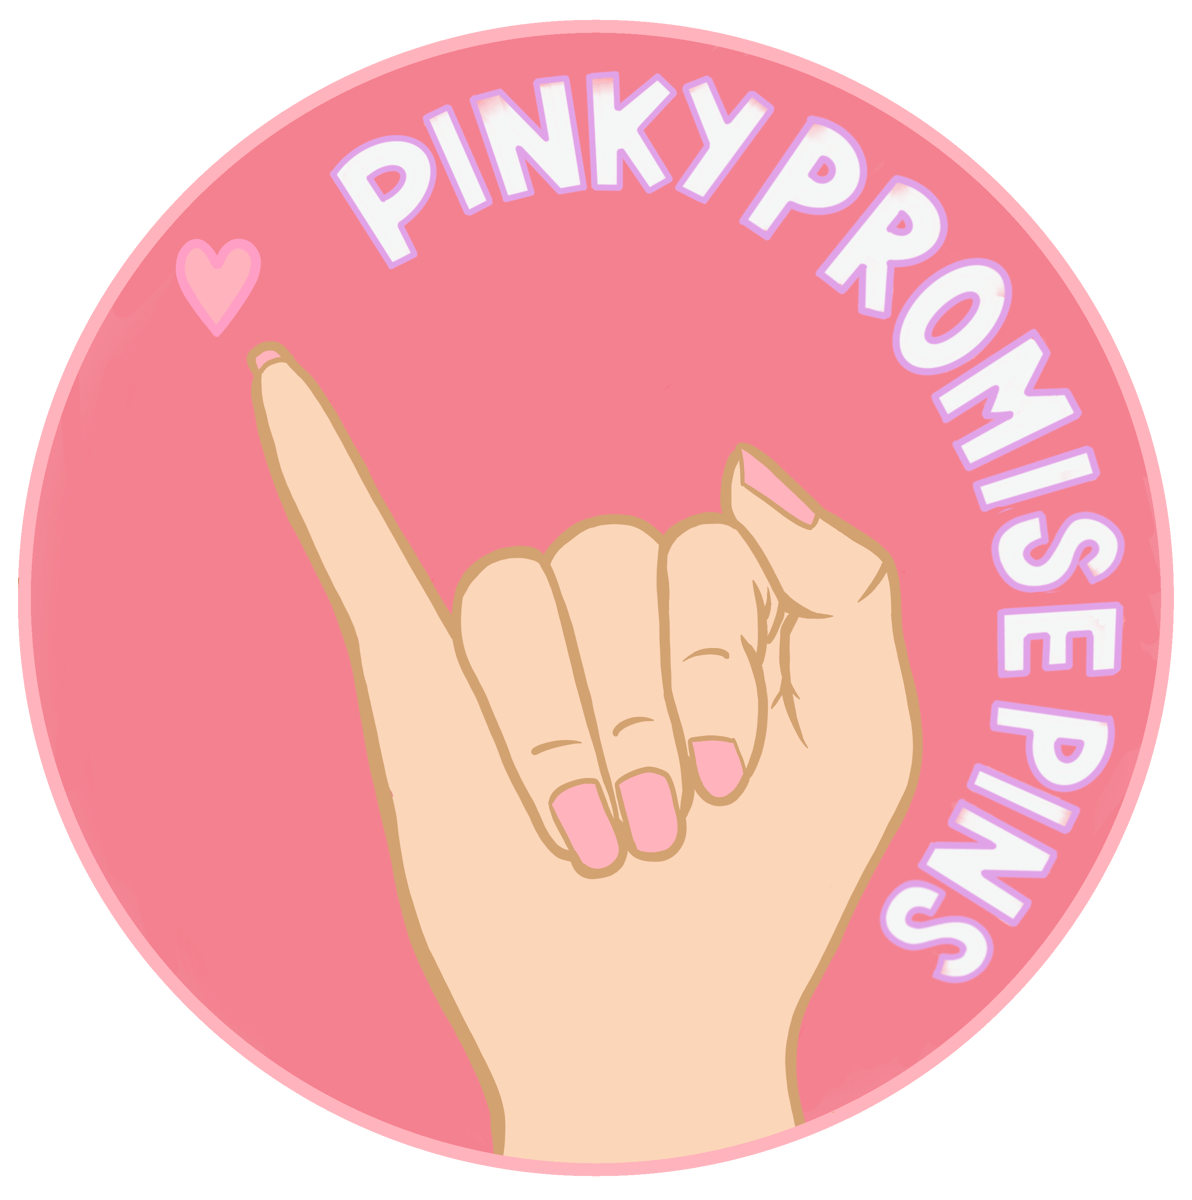 Contact | Pinky Promise Pins